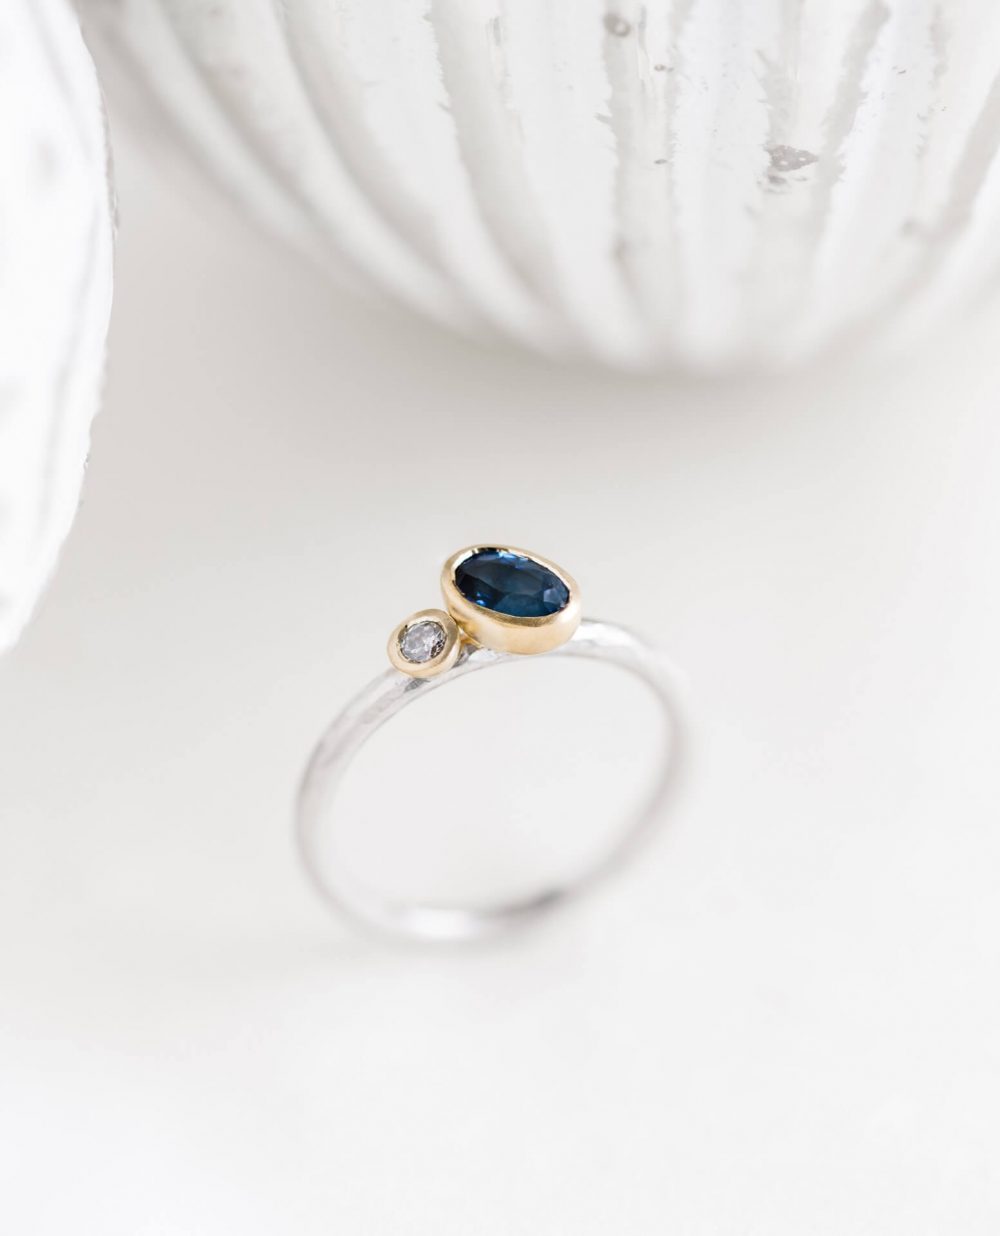 Oval Blue Sapphire And Salt And Pepper Diamond Contemporary Engagement Ring Jacks Turner Bristol